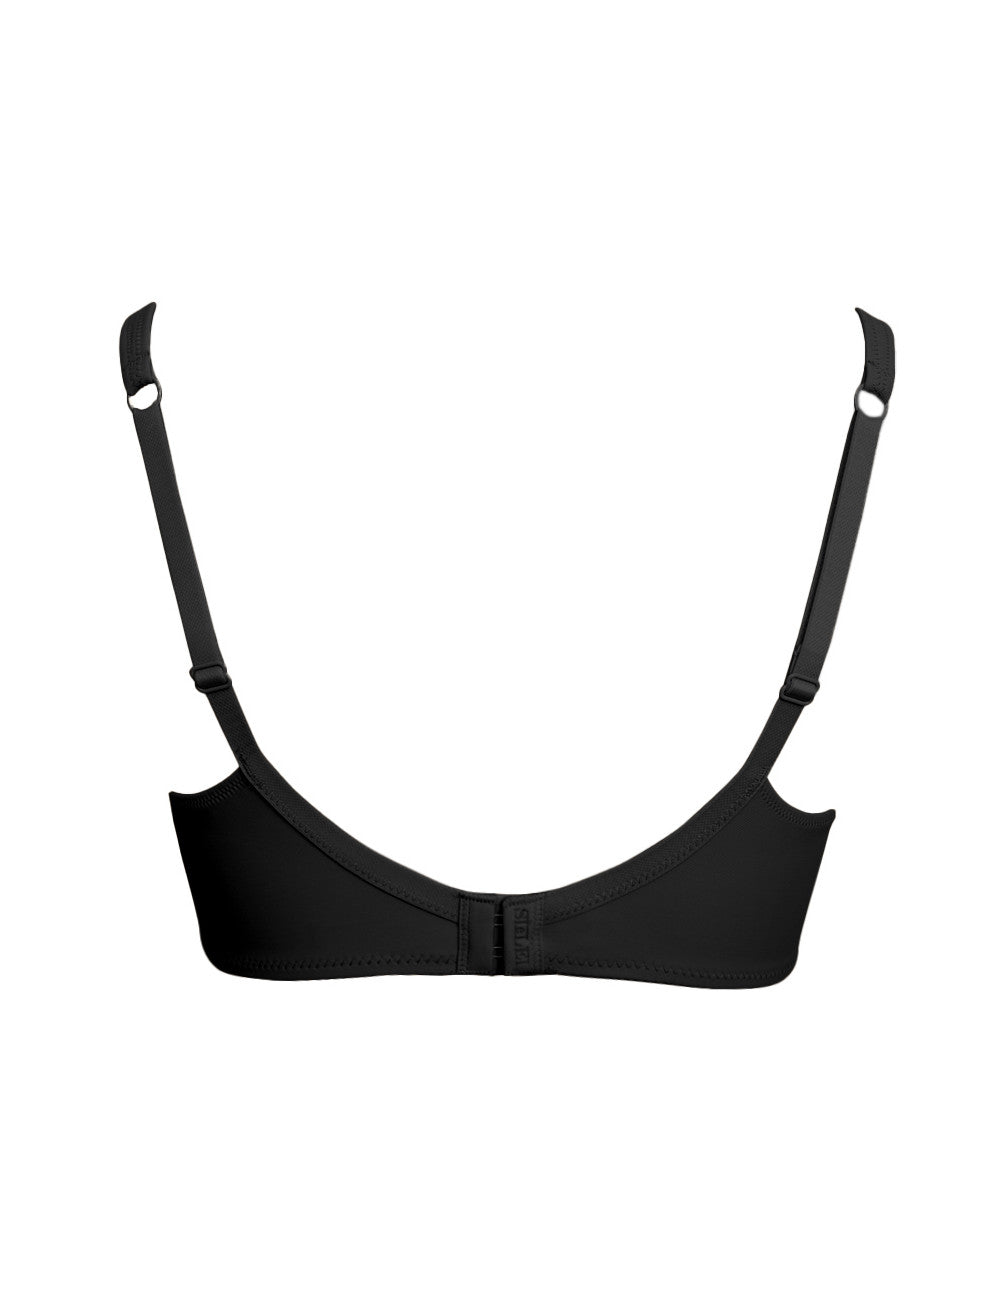 The Beauty line from SIéLEI of Italy presents an unlined and wire-free soft-cup bra characterized by its graceful design and smooth opaque, stretch microfiber fabric that provide comfort during any activity.